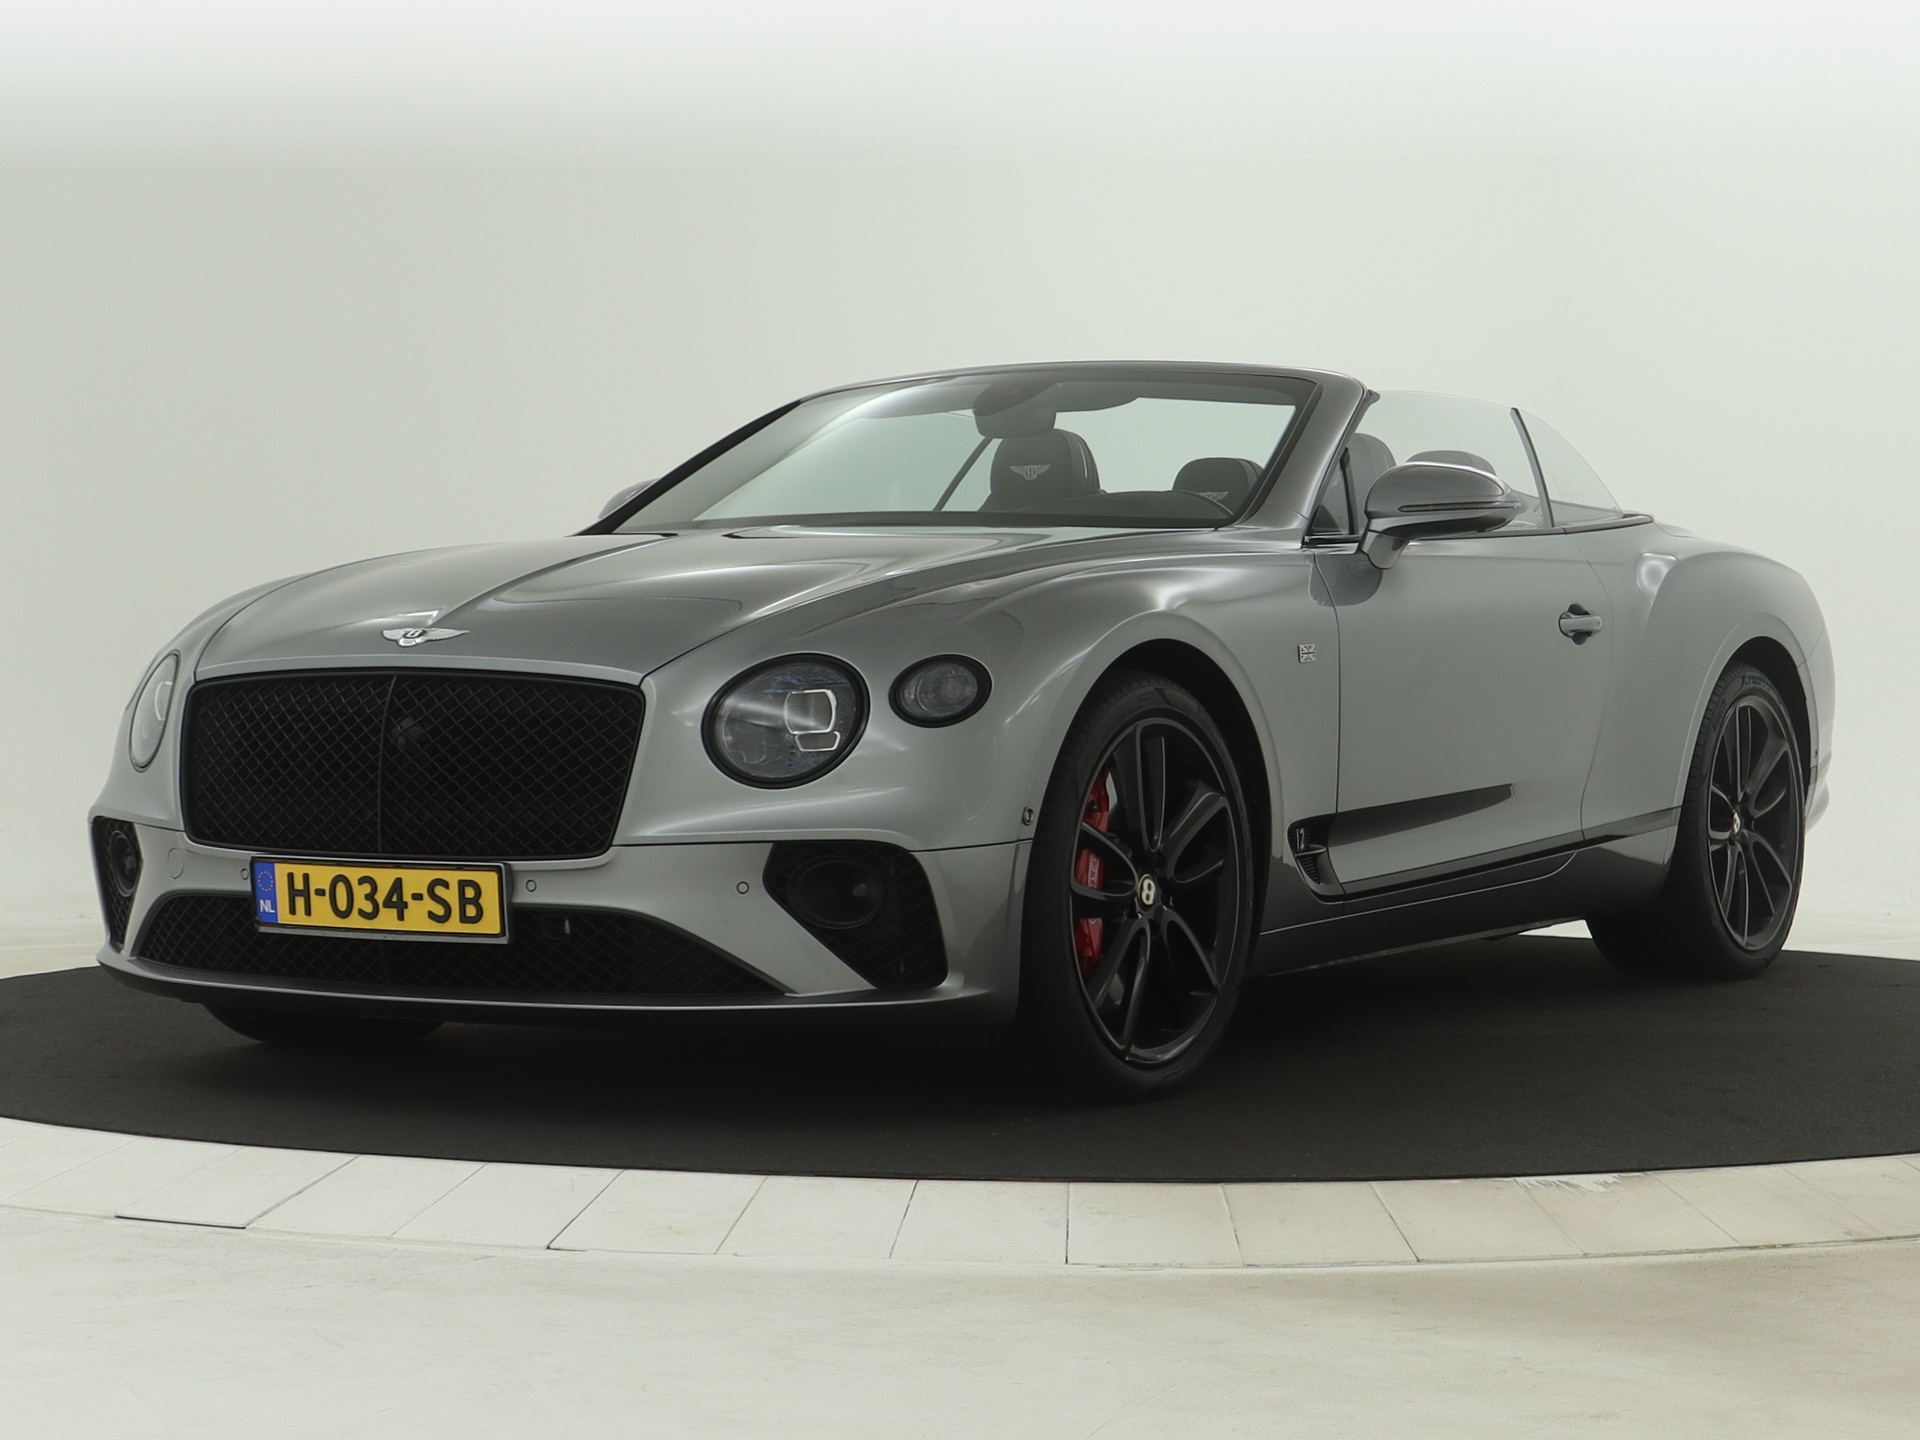 Bentley Continental GTC 6.0 W12 First Edition Mulliner - Bang & Olufsen - Black package - Massage seats